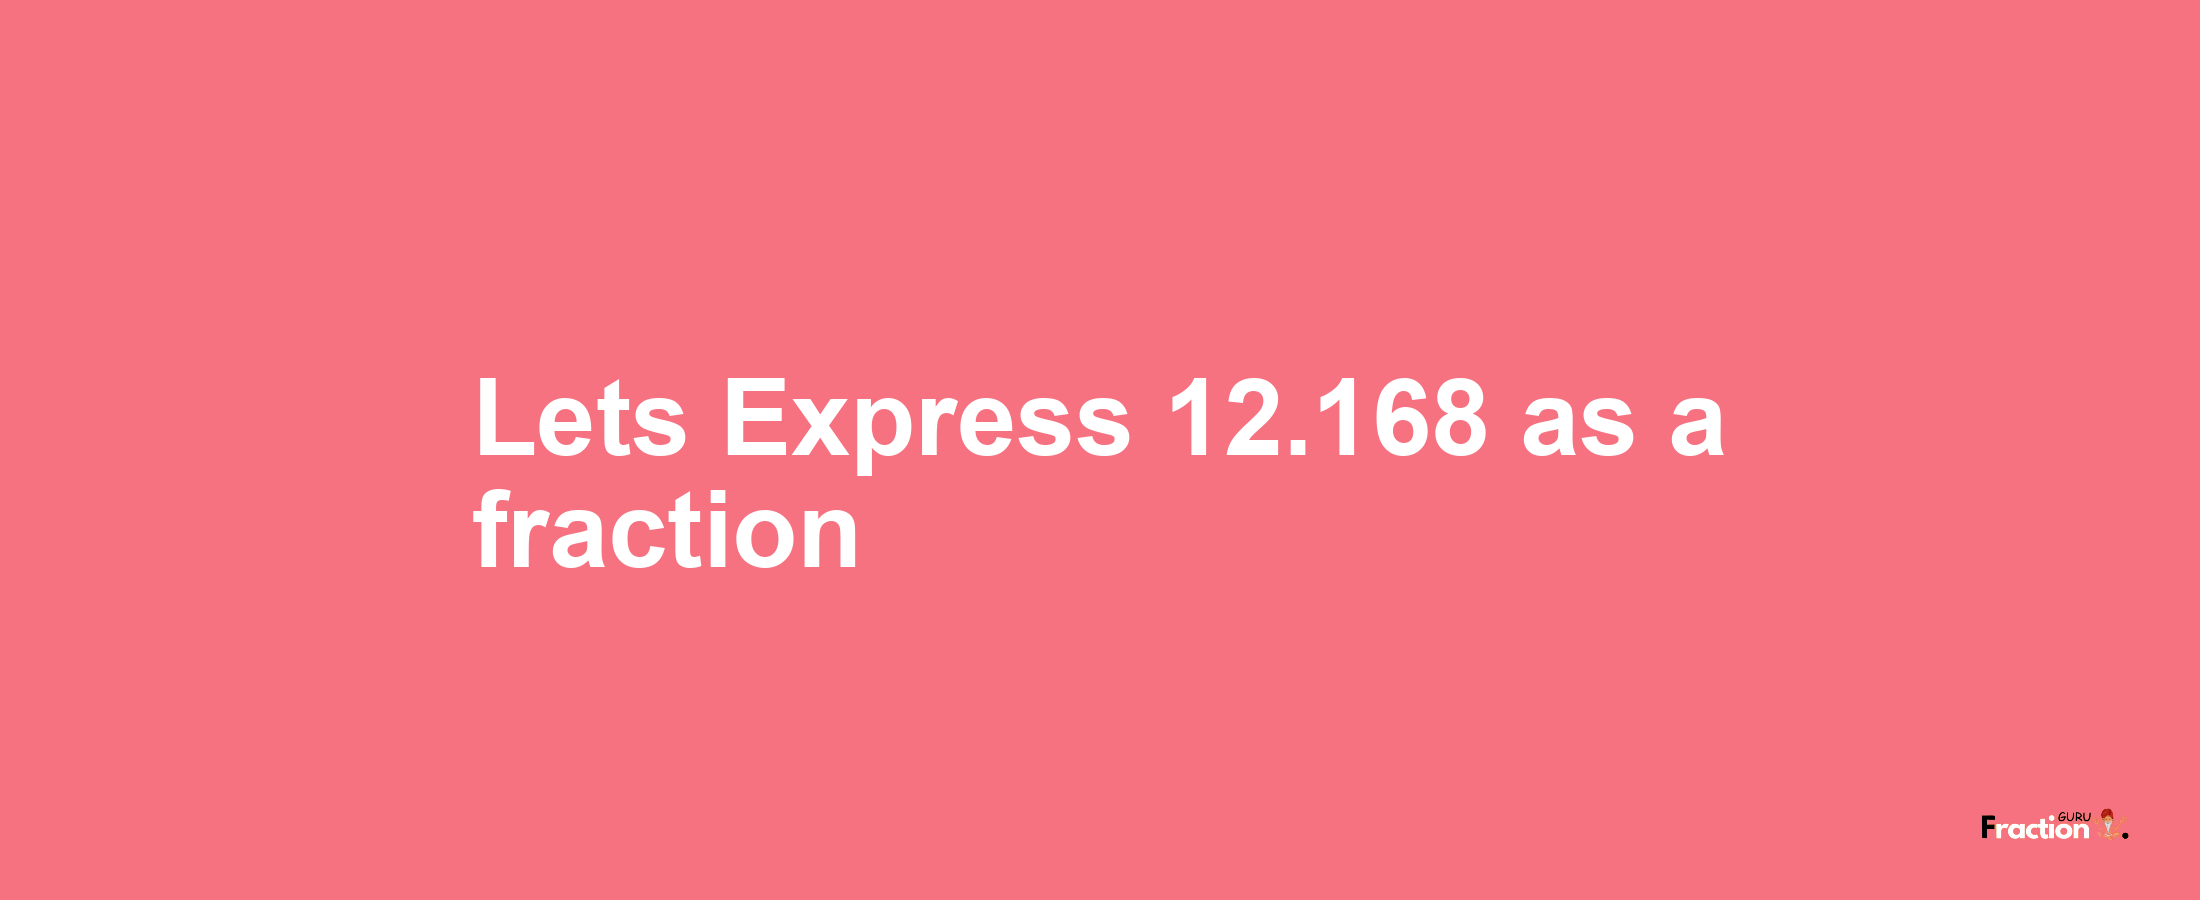 Lets Express 12.168 as afraction